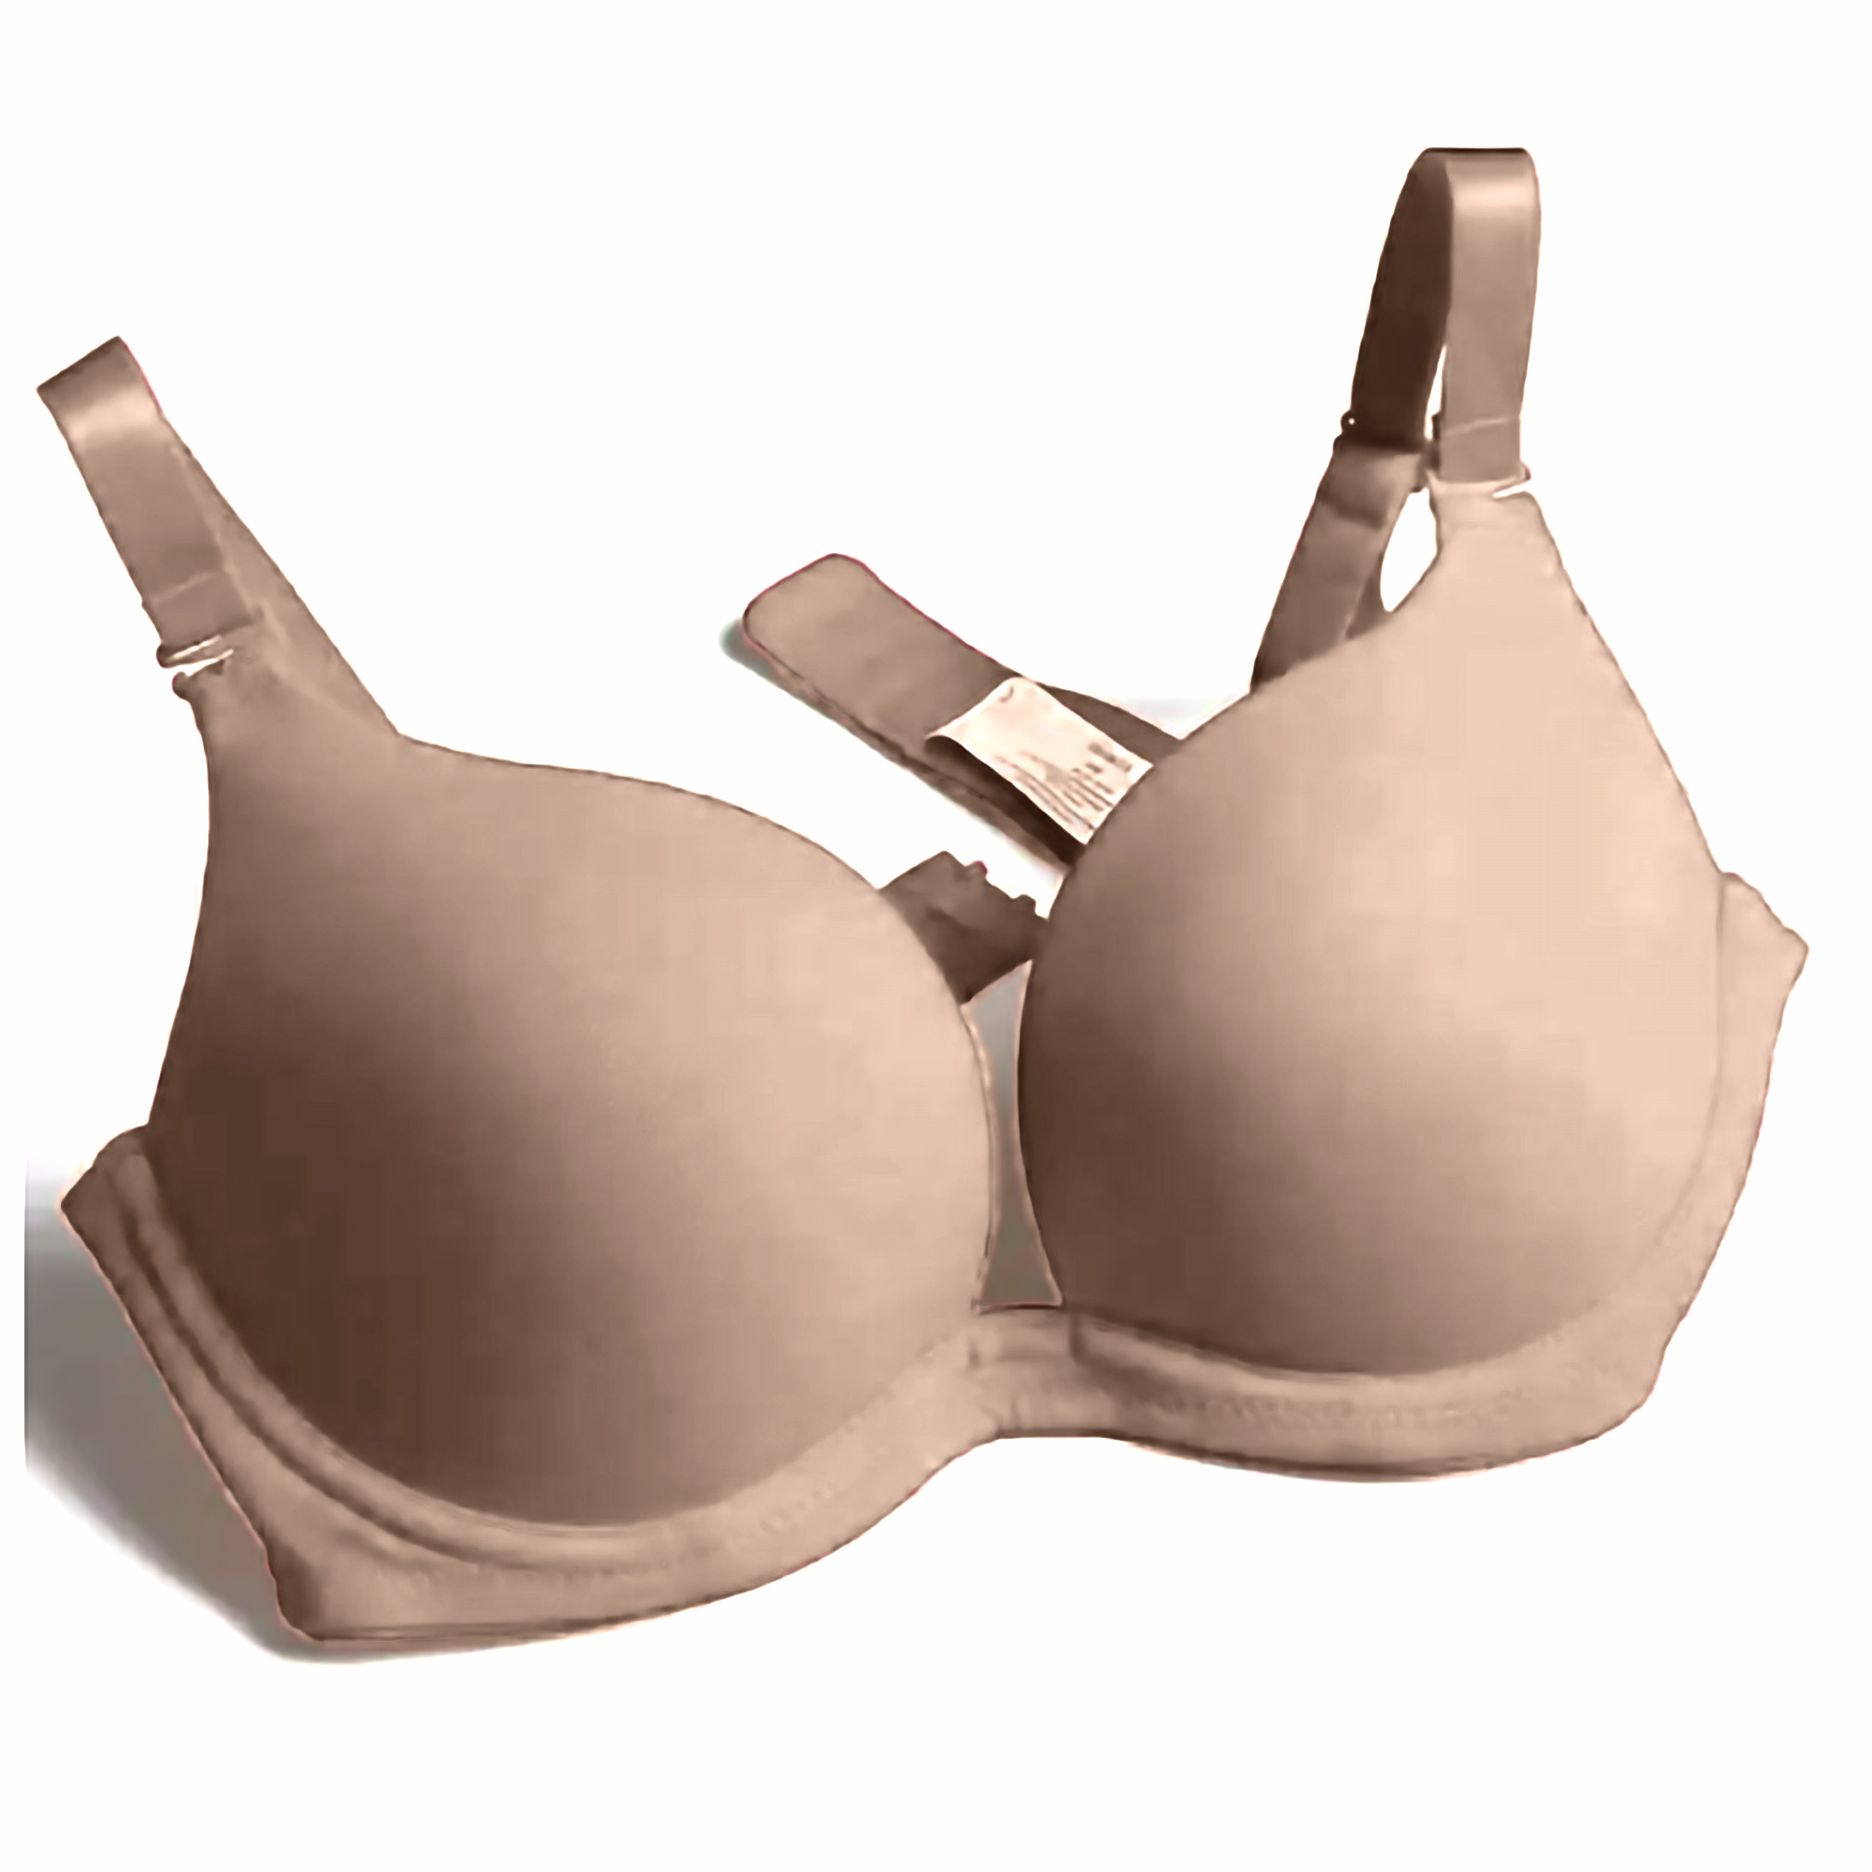 Export Quality Foam Bra for Women Body Fitting Stylish And